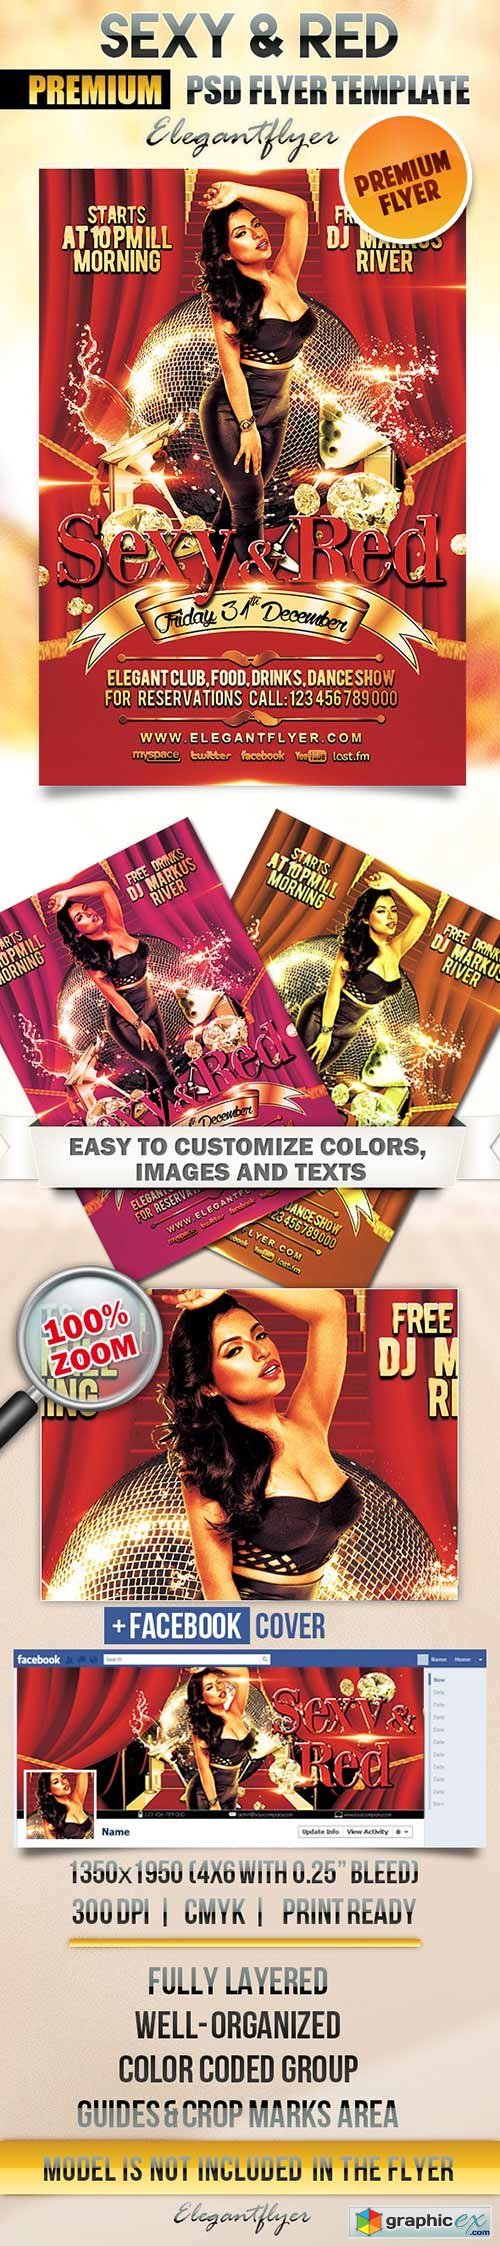 Sexy and Red Flyer PSD Template + Facebook Cover